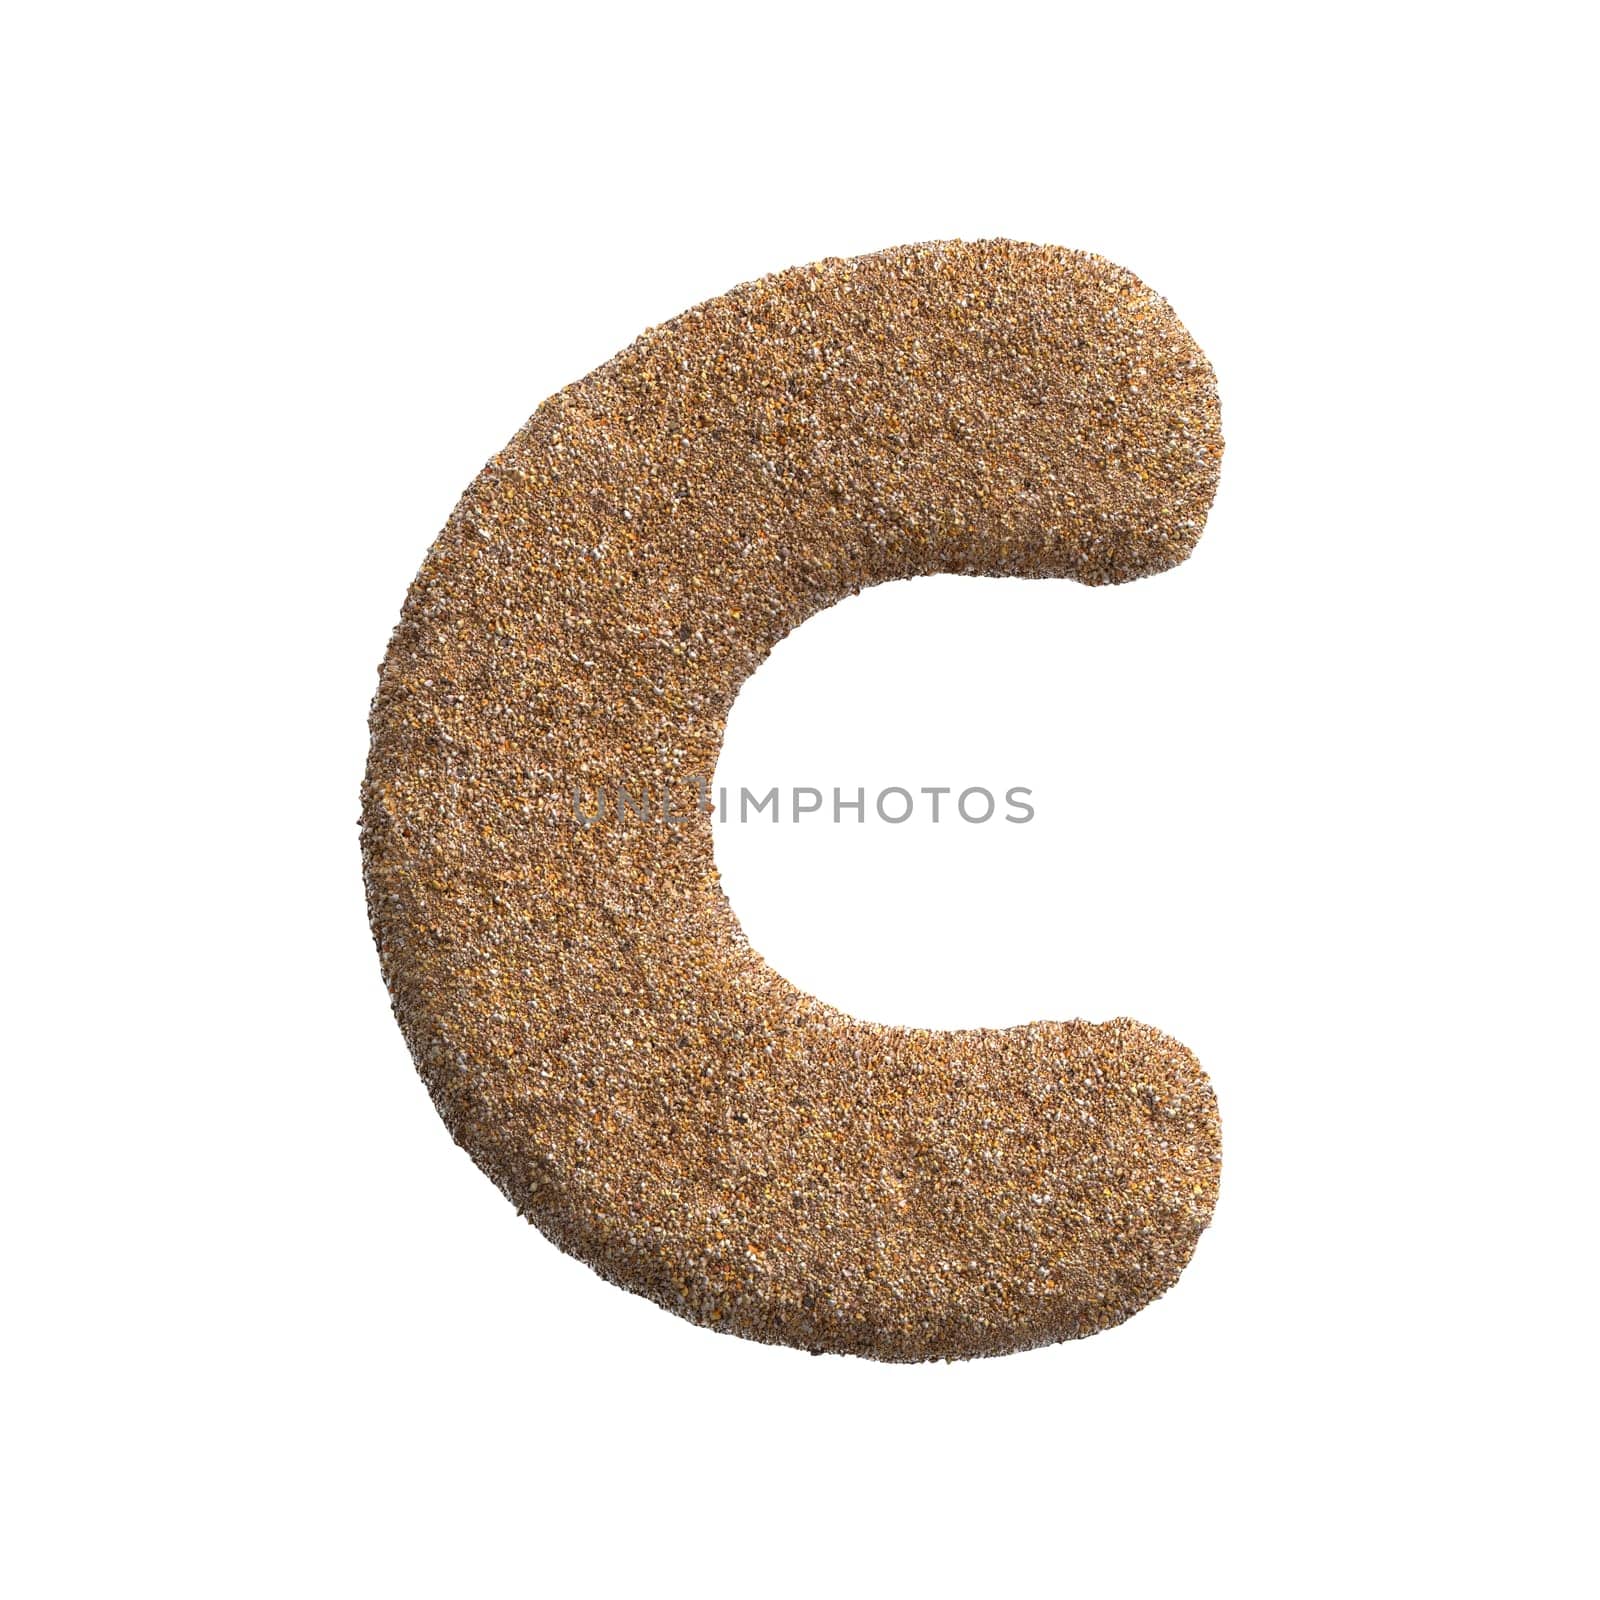 Sand letter C - large 3d beach font isolated on white background. This alphabet is perfect for creative illustrations related but not limited to Holidays, travel, ocean...